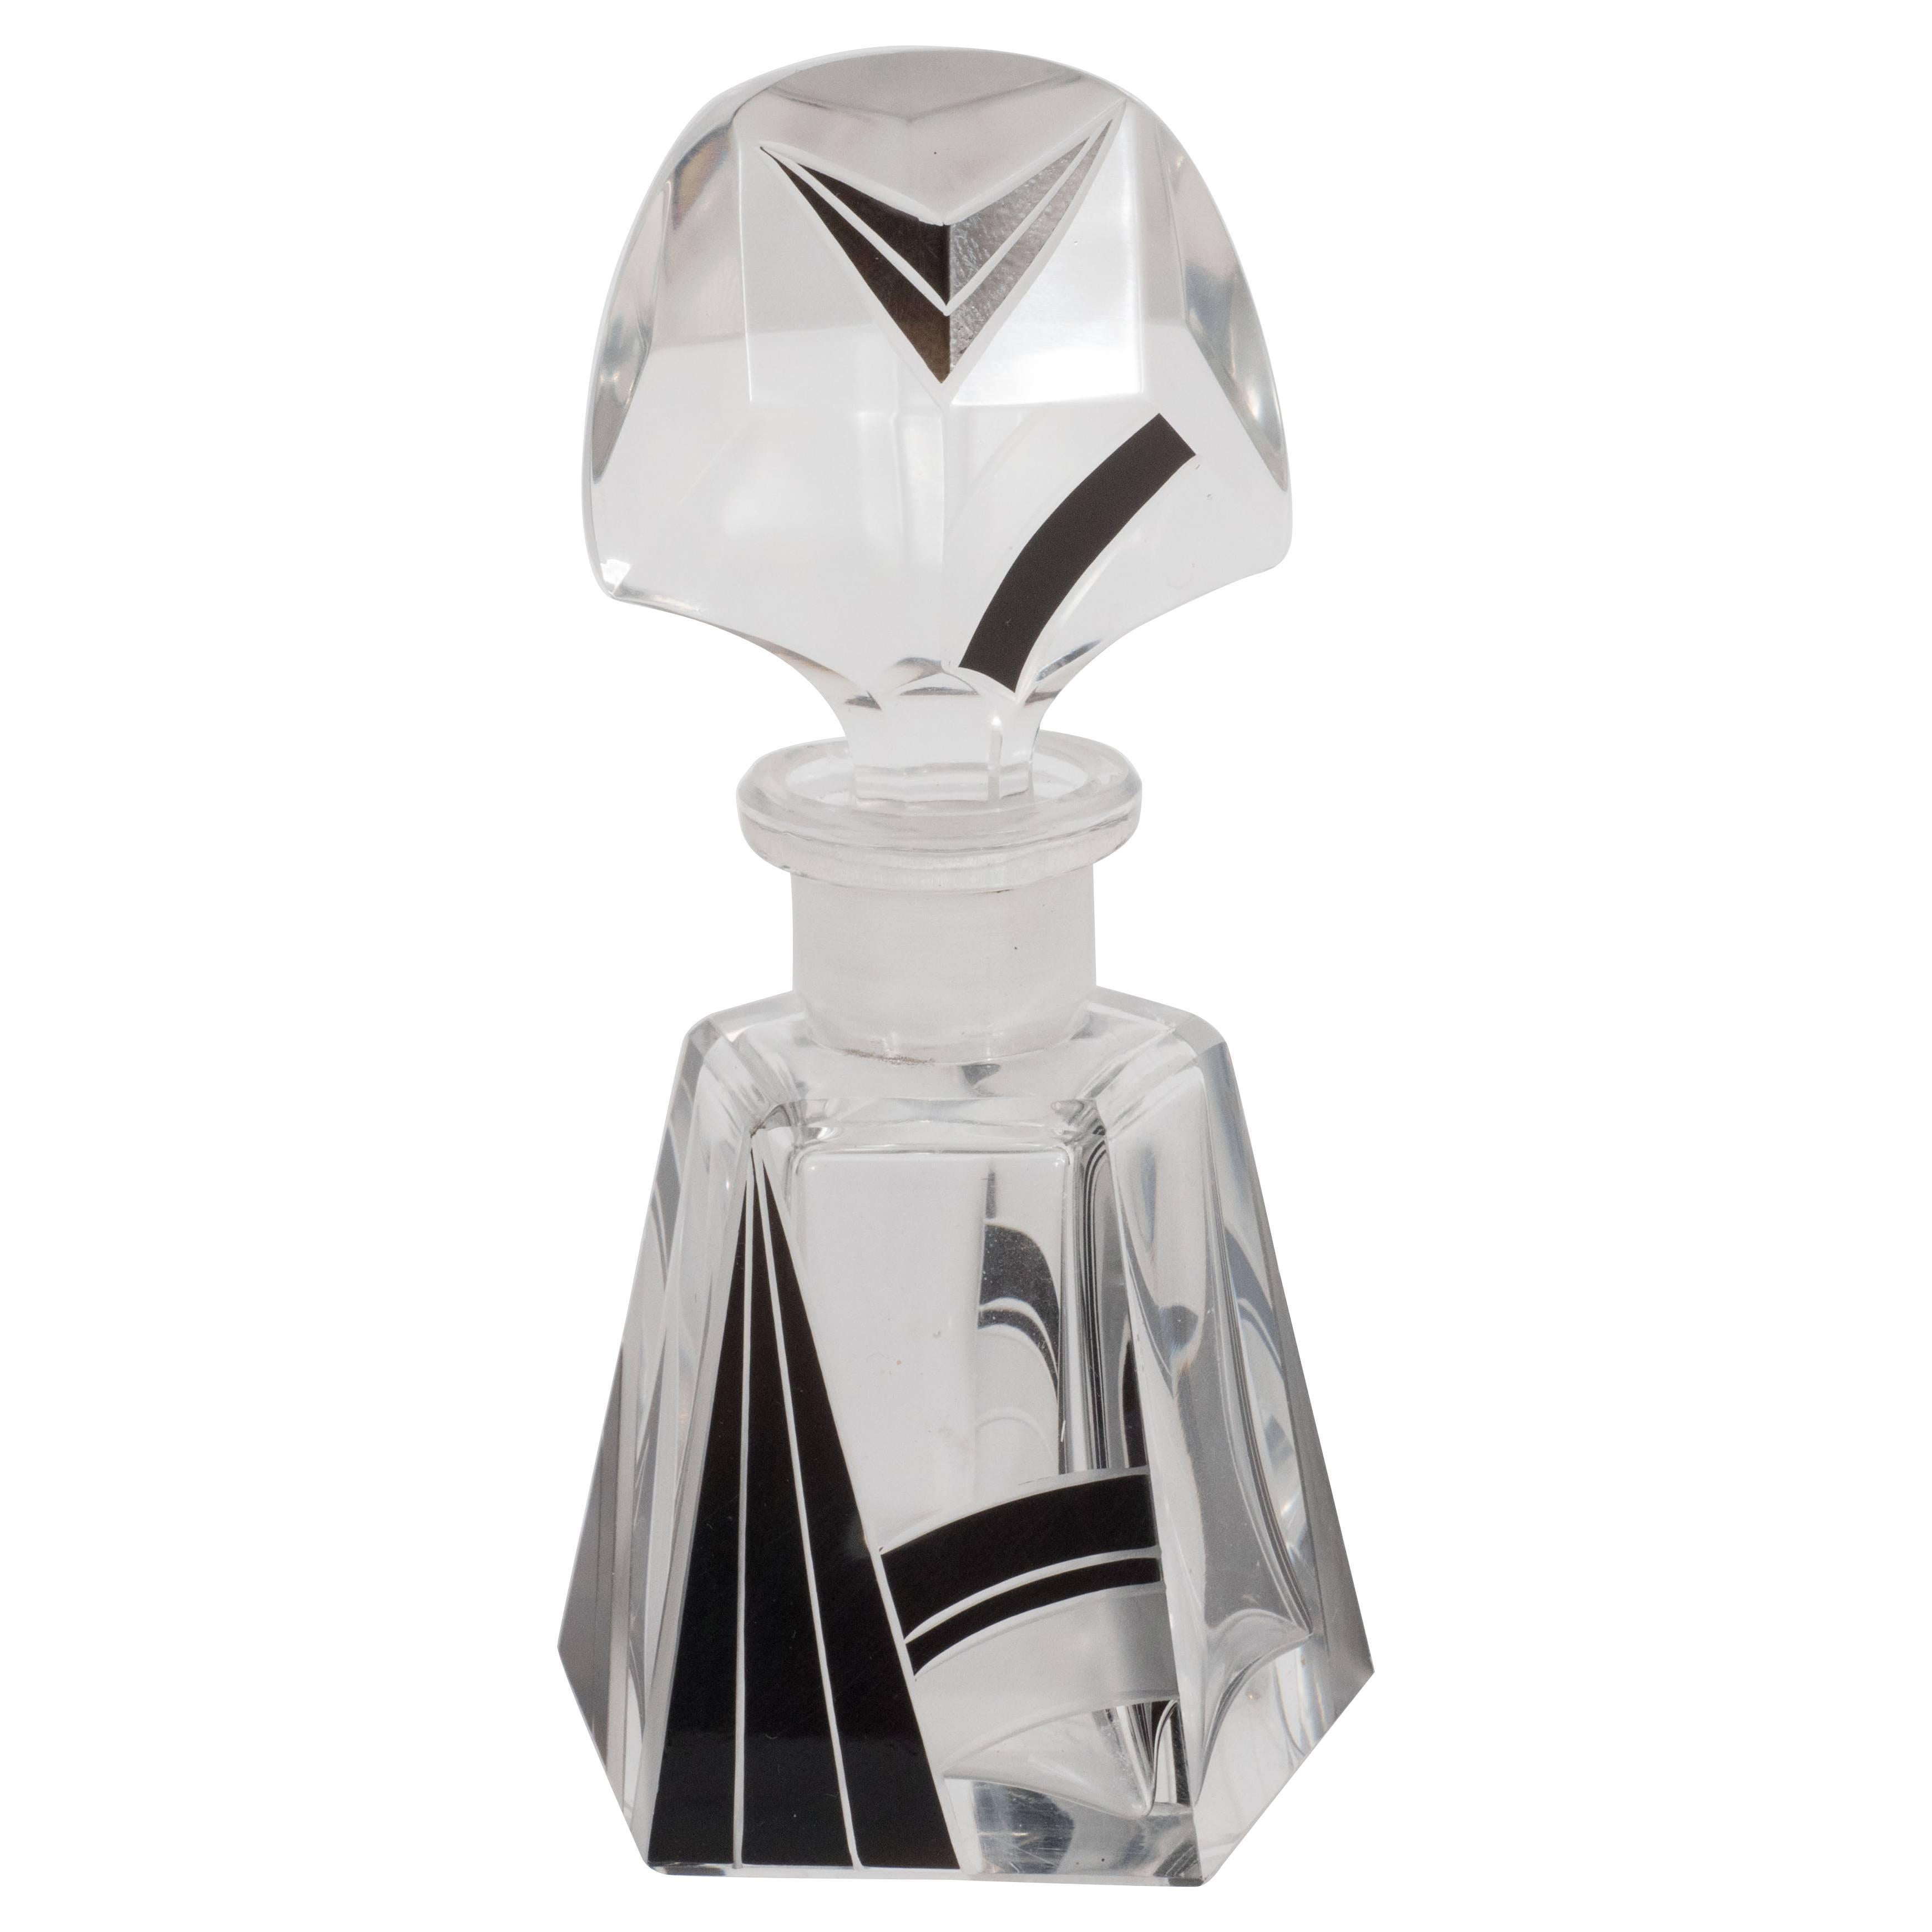 Czech Art Deco Perfume Bottle with Black Overlaid & Frosted Glass Cubist Detail